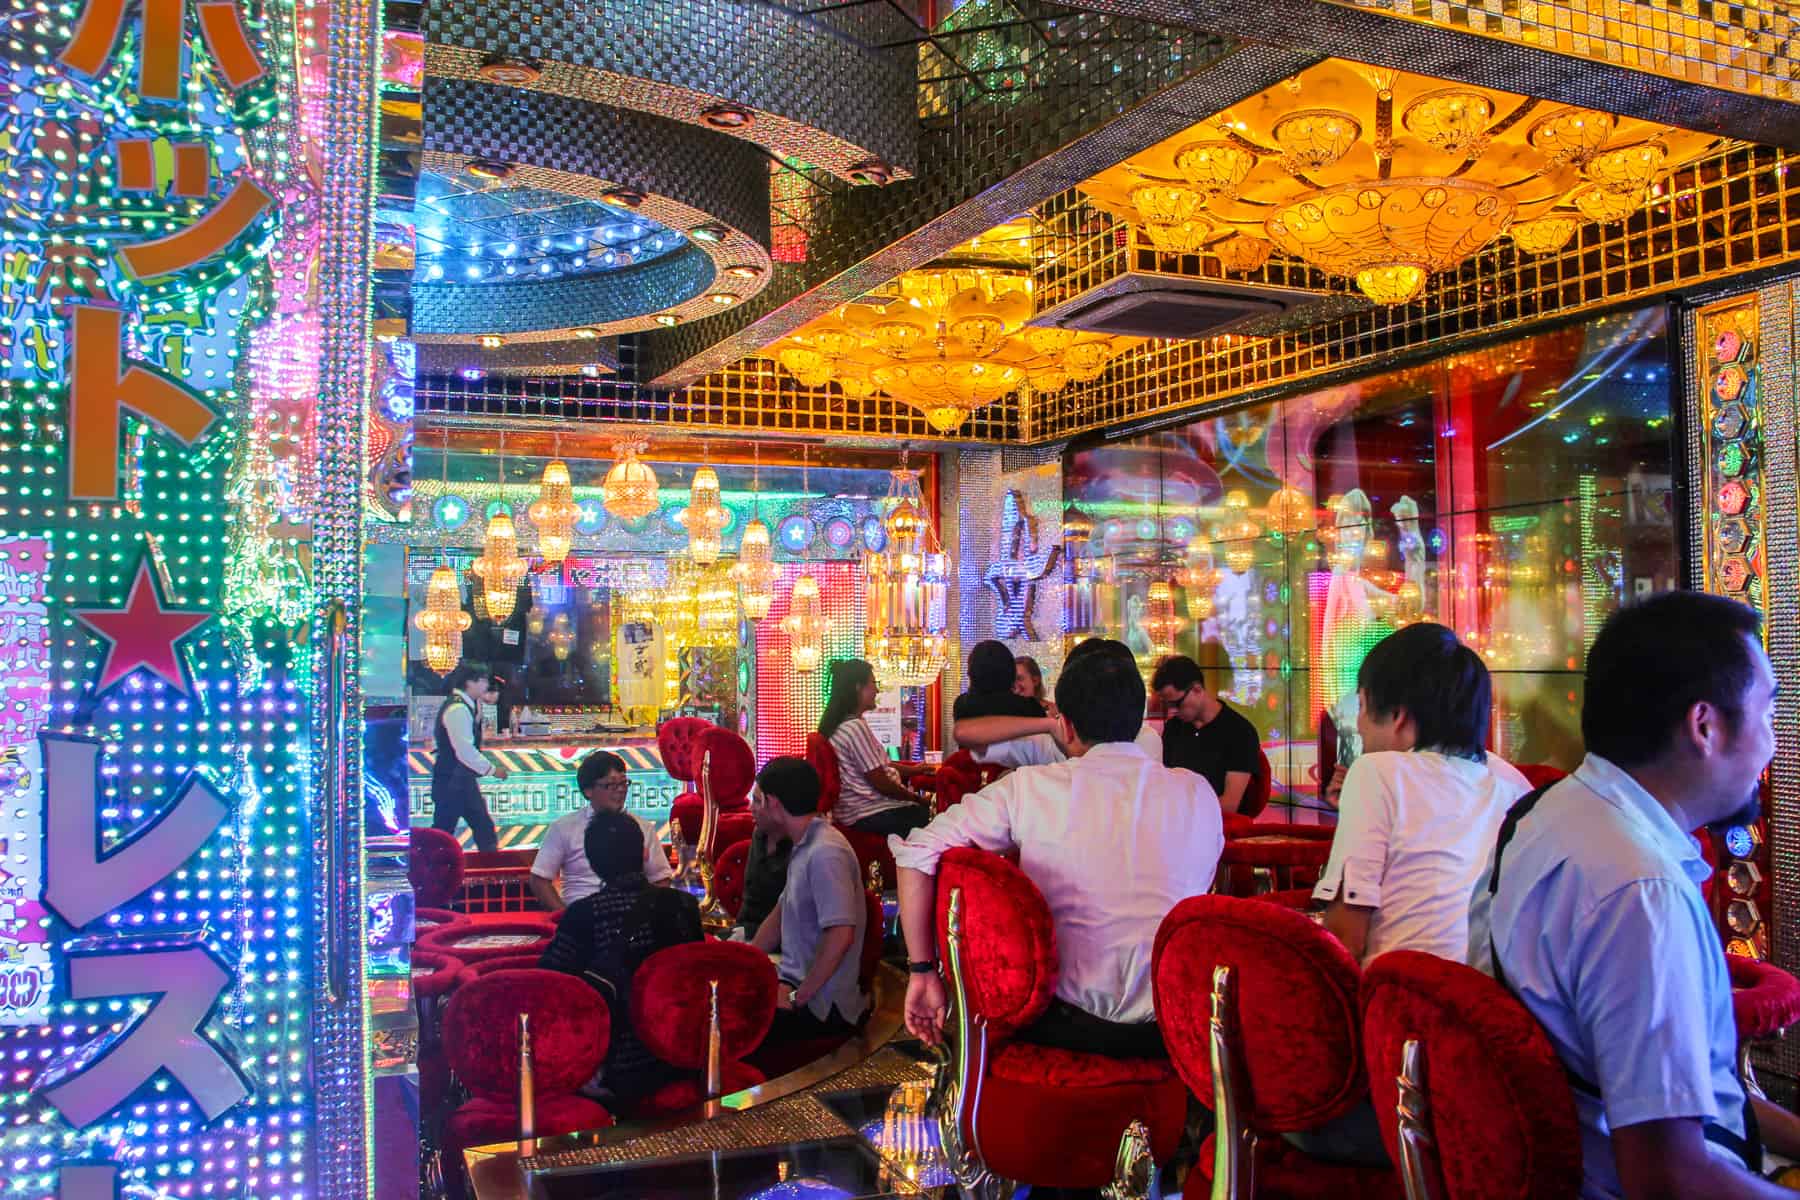 The Robot Restaurant in Tokyo The Most Bizarre Show Ever